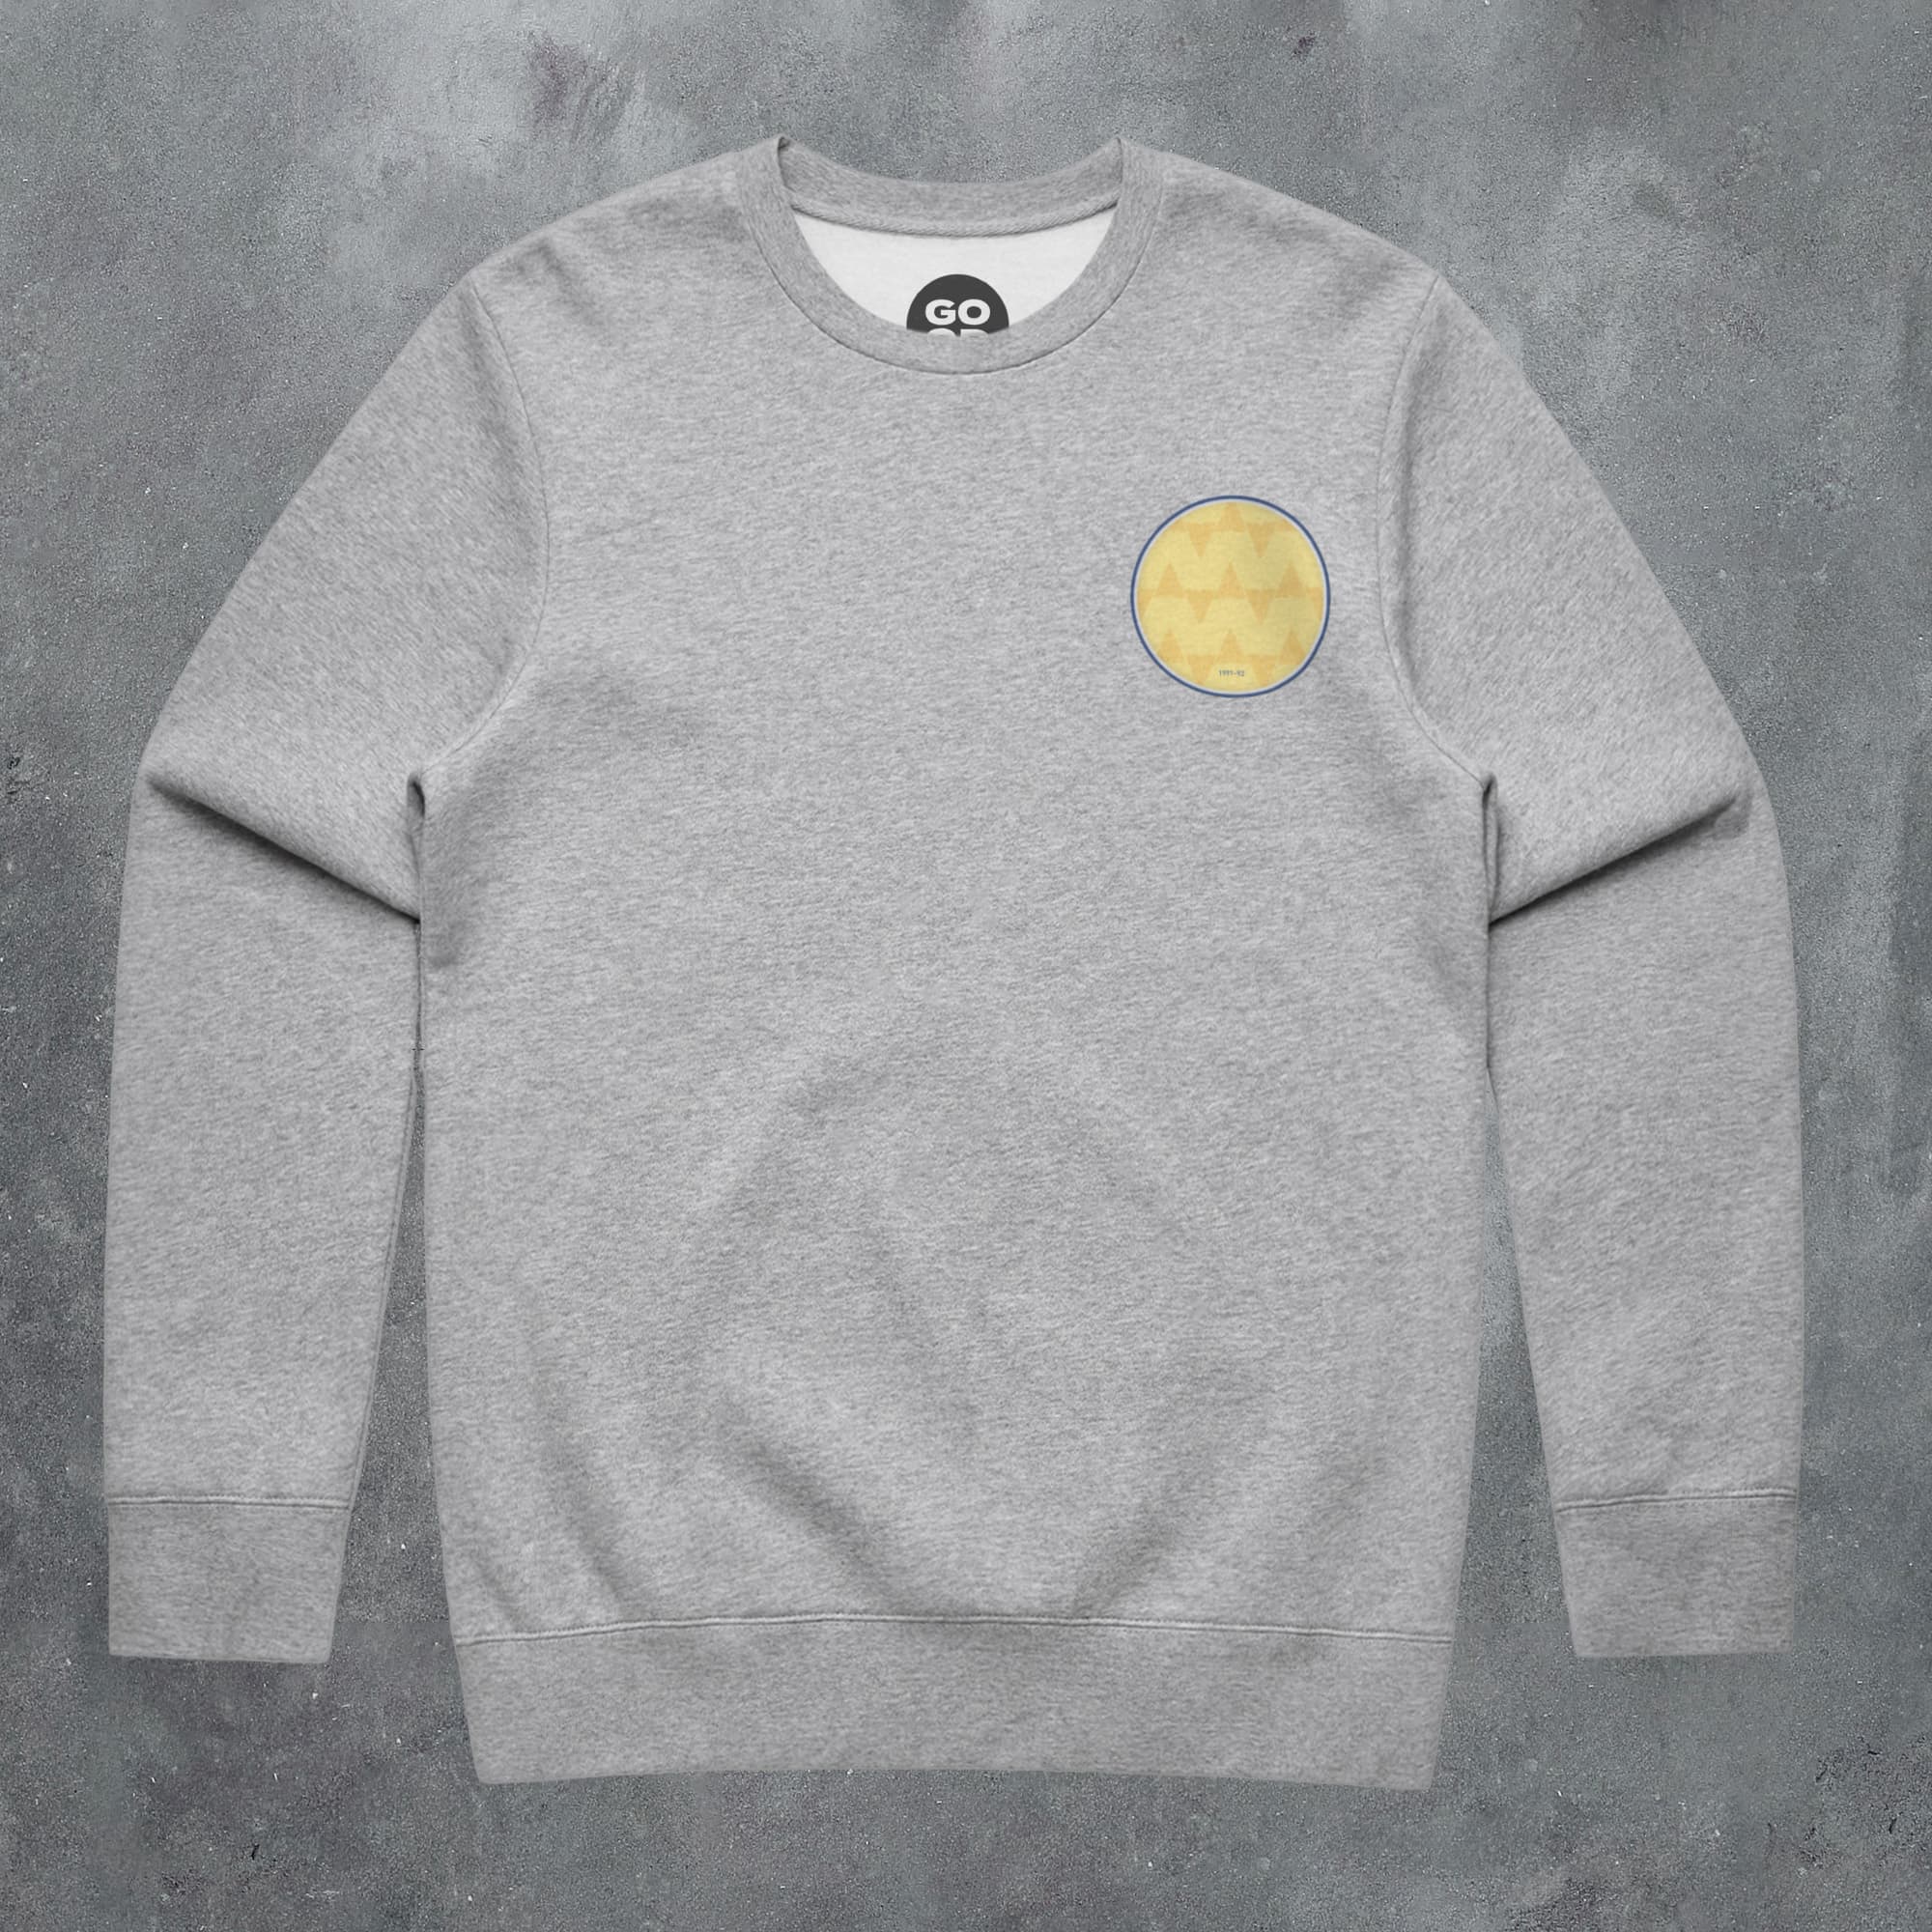 a grey sweatshirt with a yellow circle on the chest